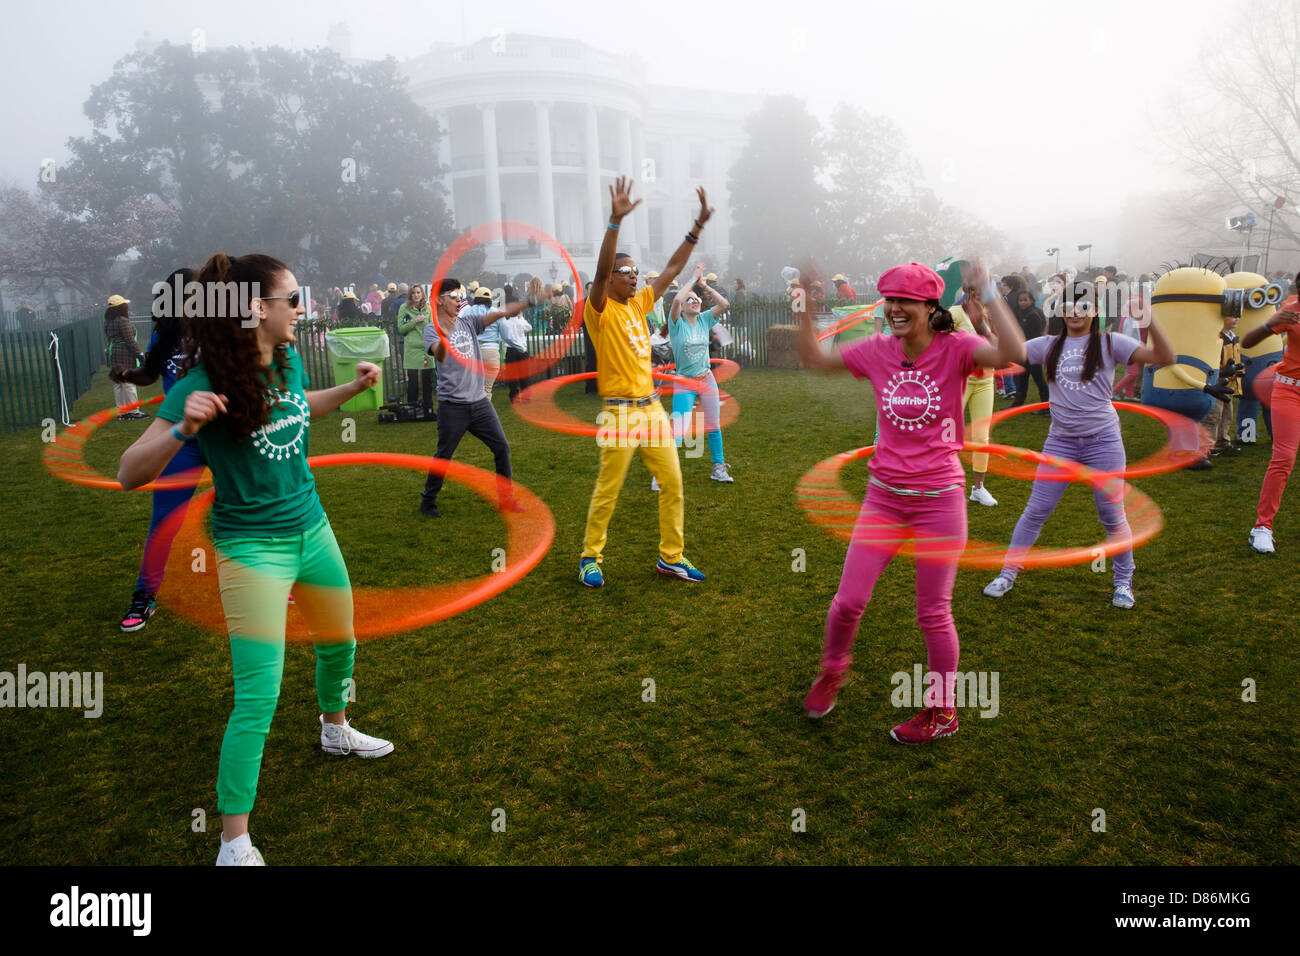 KidTribe hula hoopers perform during the Easter Egg Roll on the South Lawn of the White House on a foggy day April 1, 2013 in Washington, DC. Stock Photo